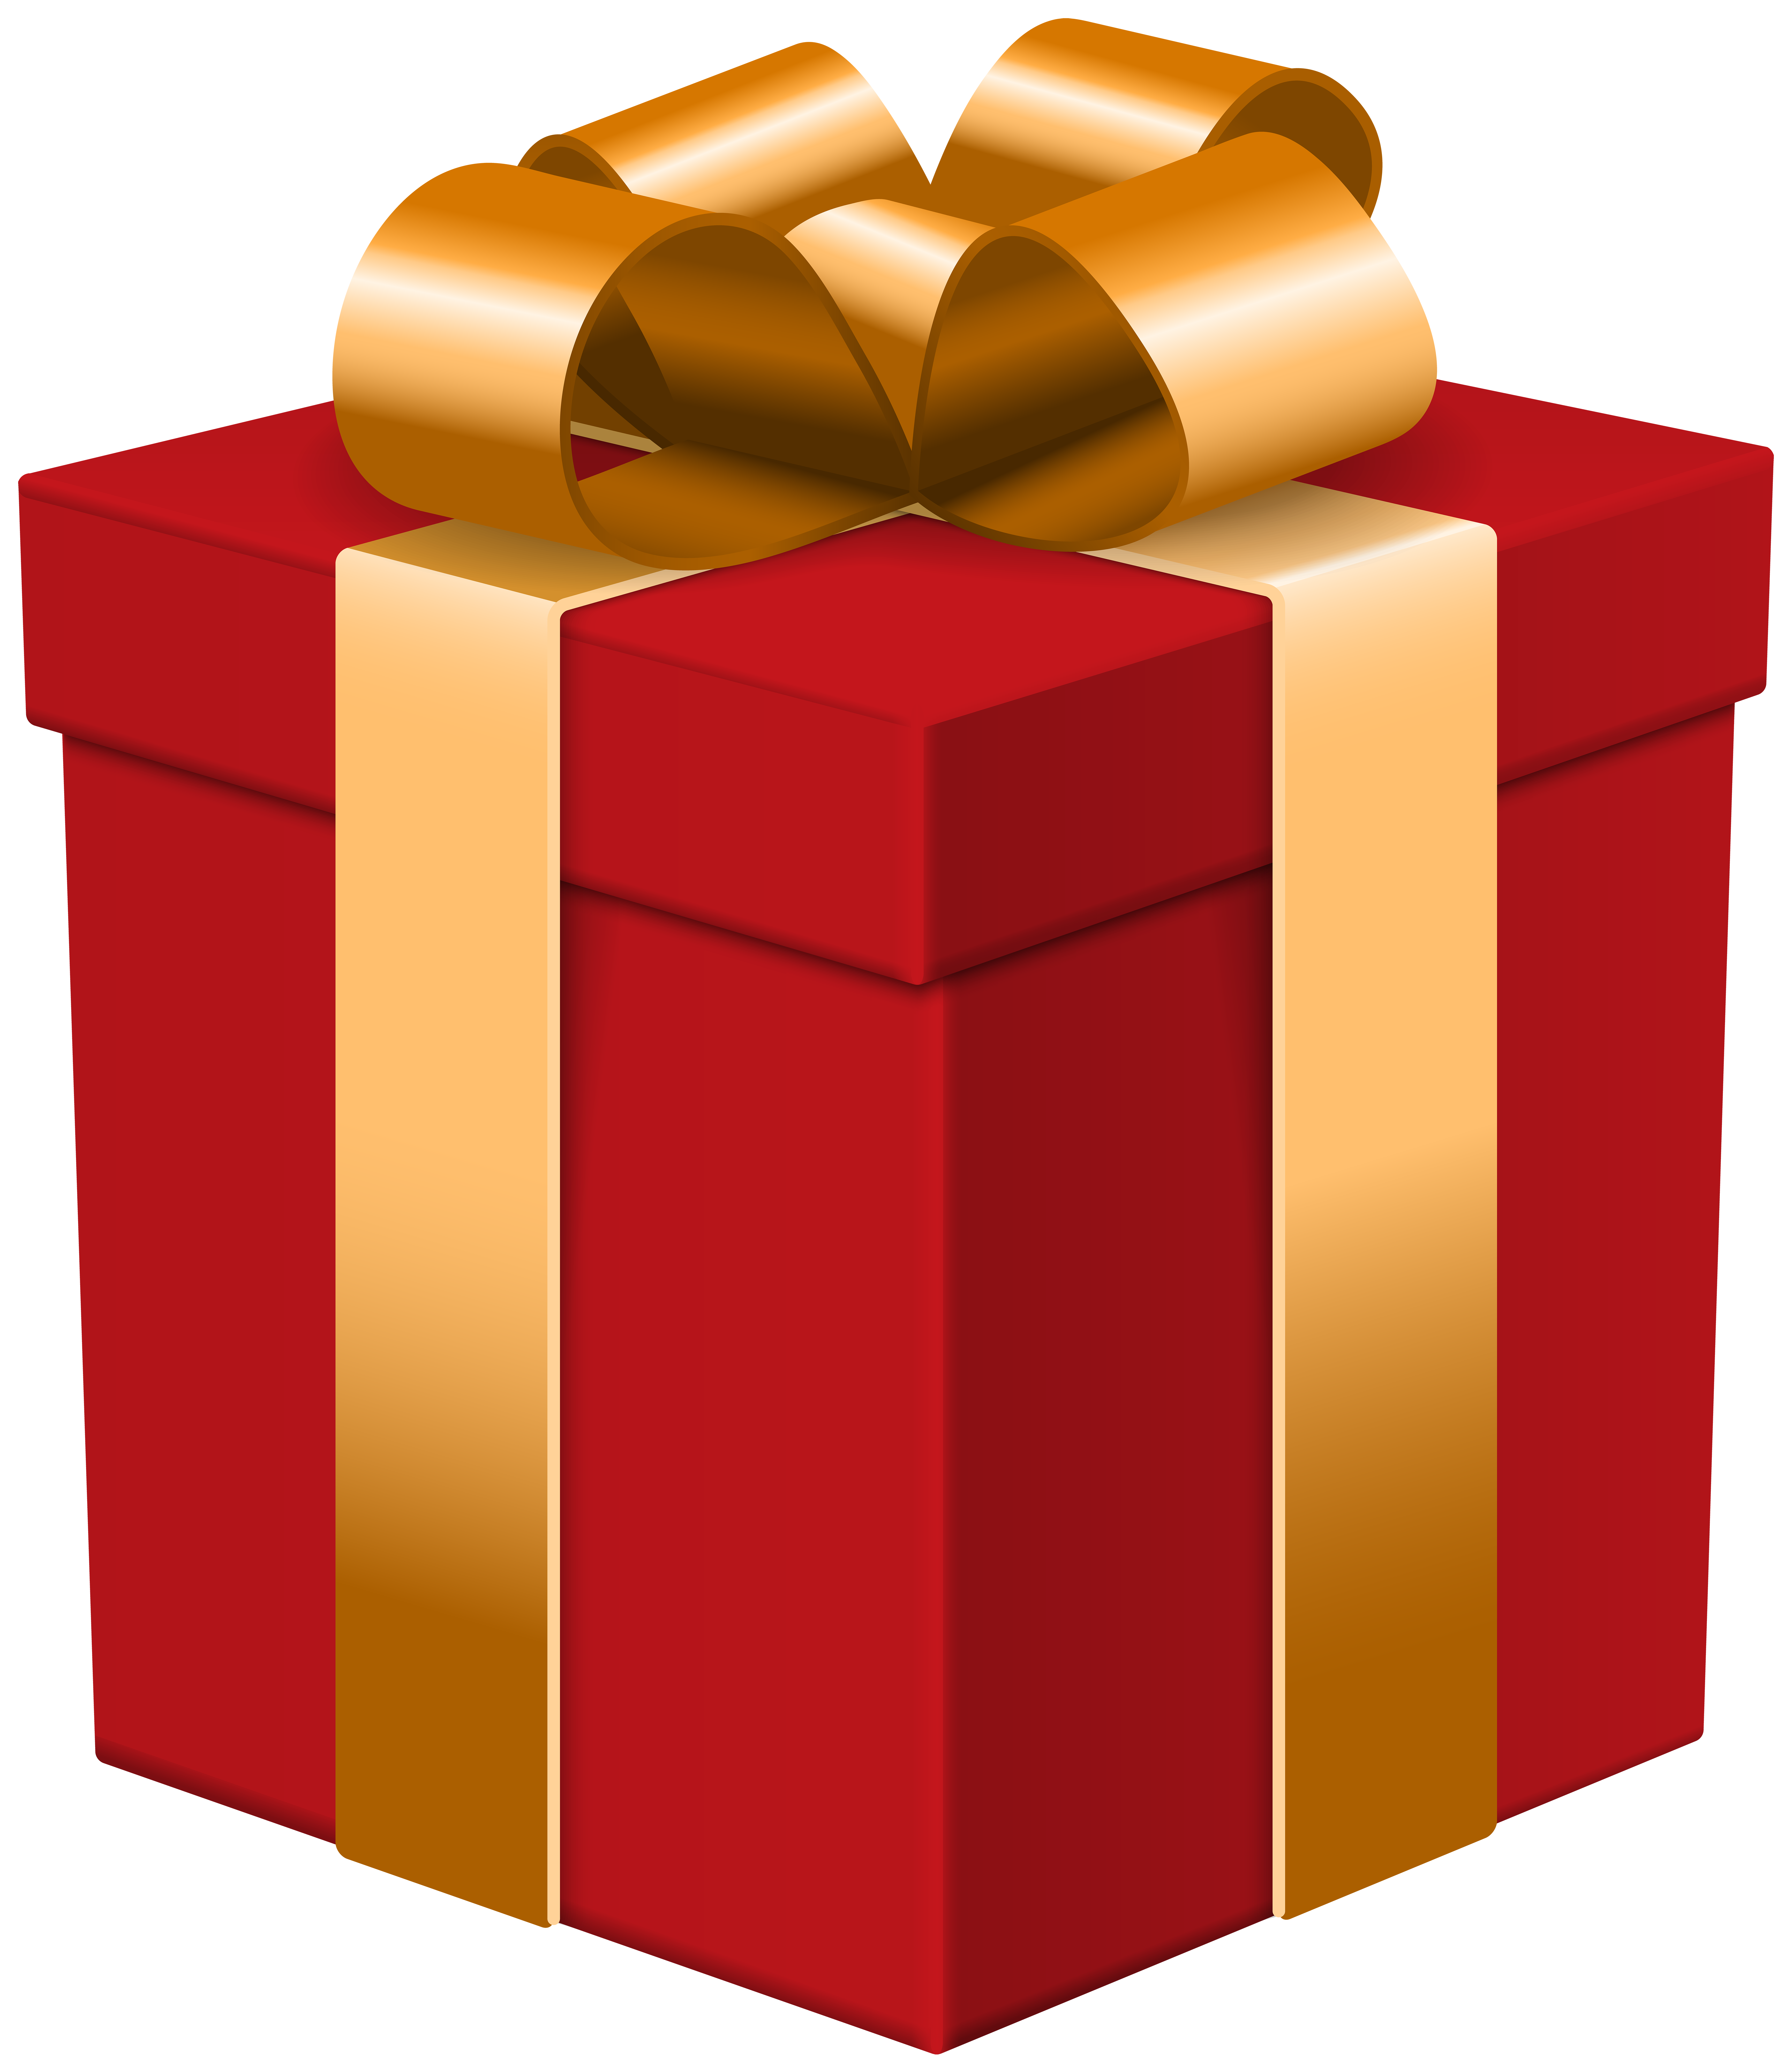 gift boxes clipart